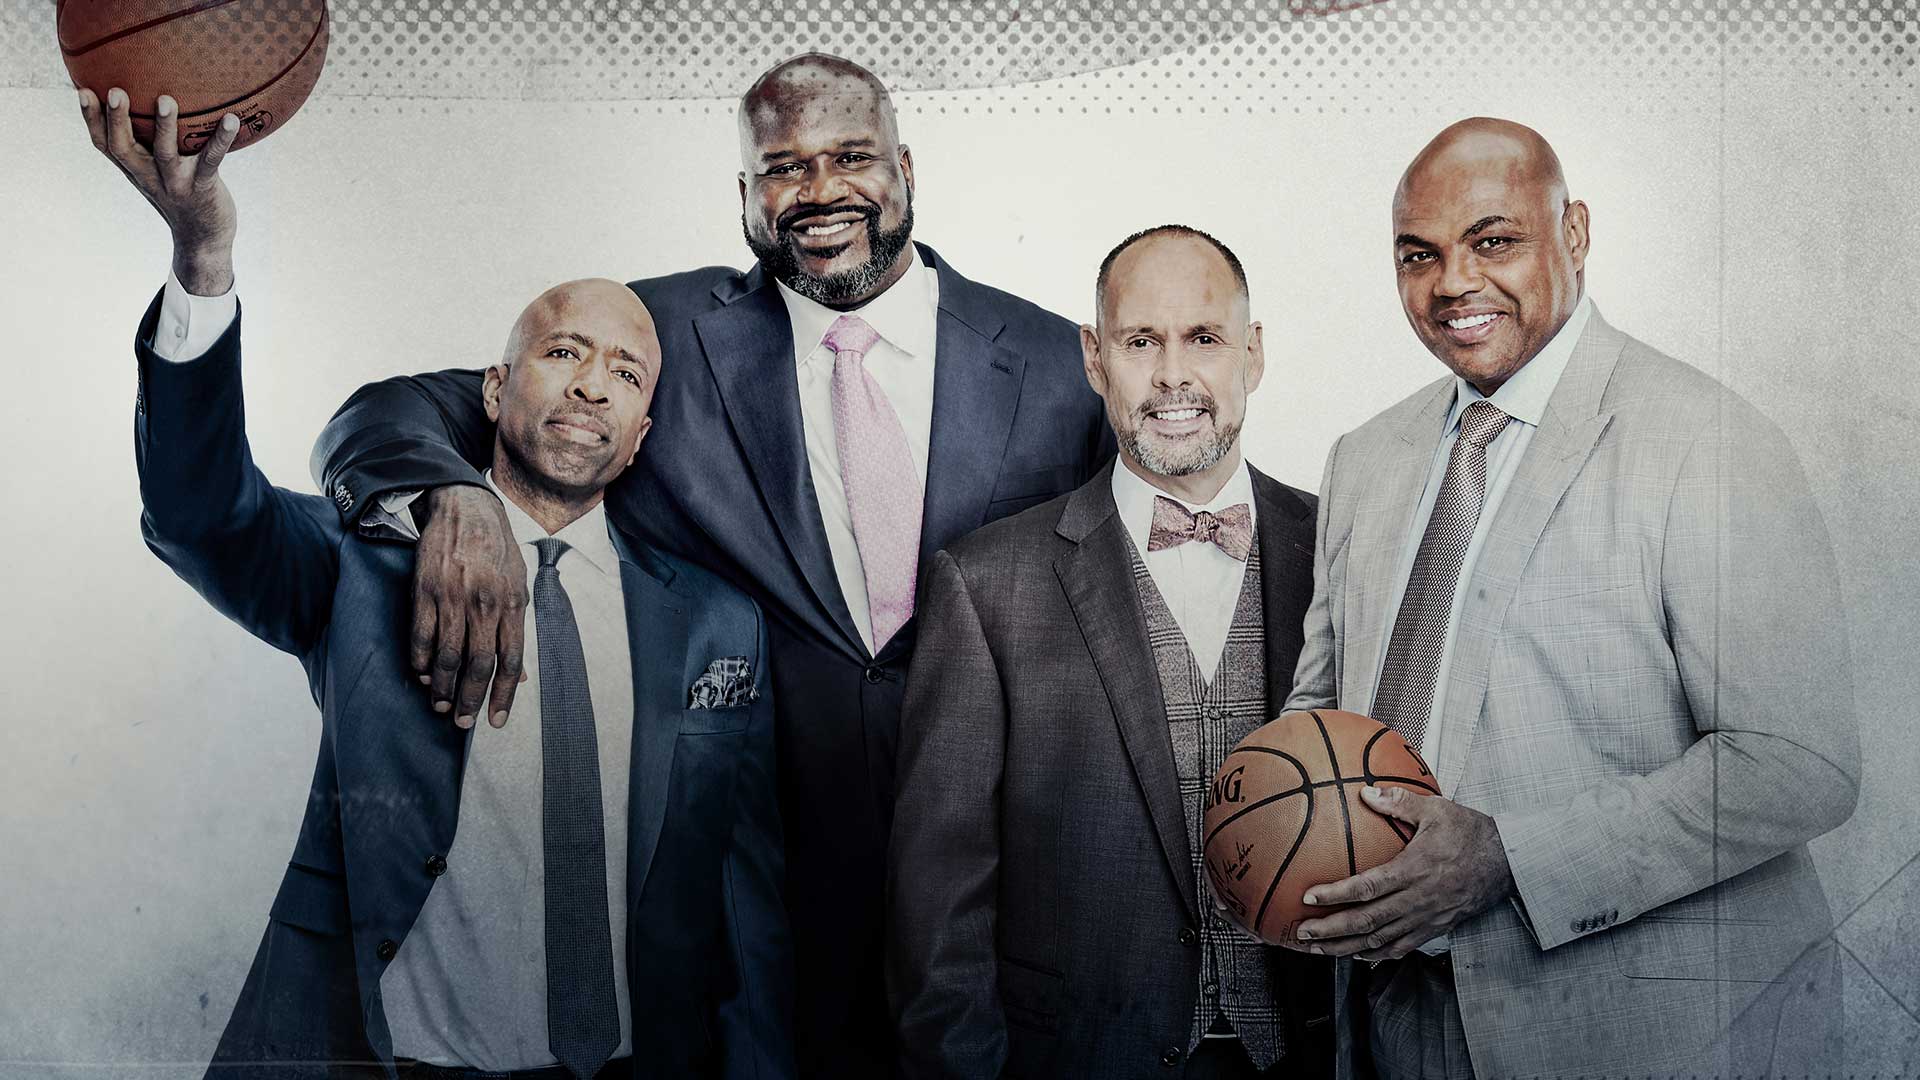 Charles Barkley leaves TNT host Ernie Johnson choked up after